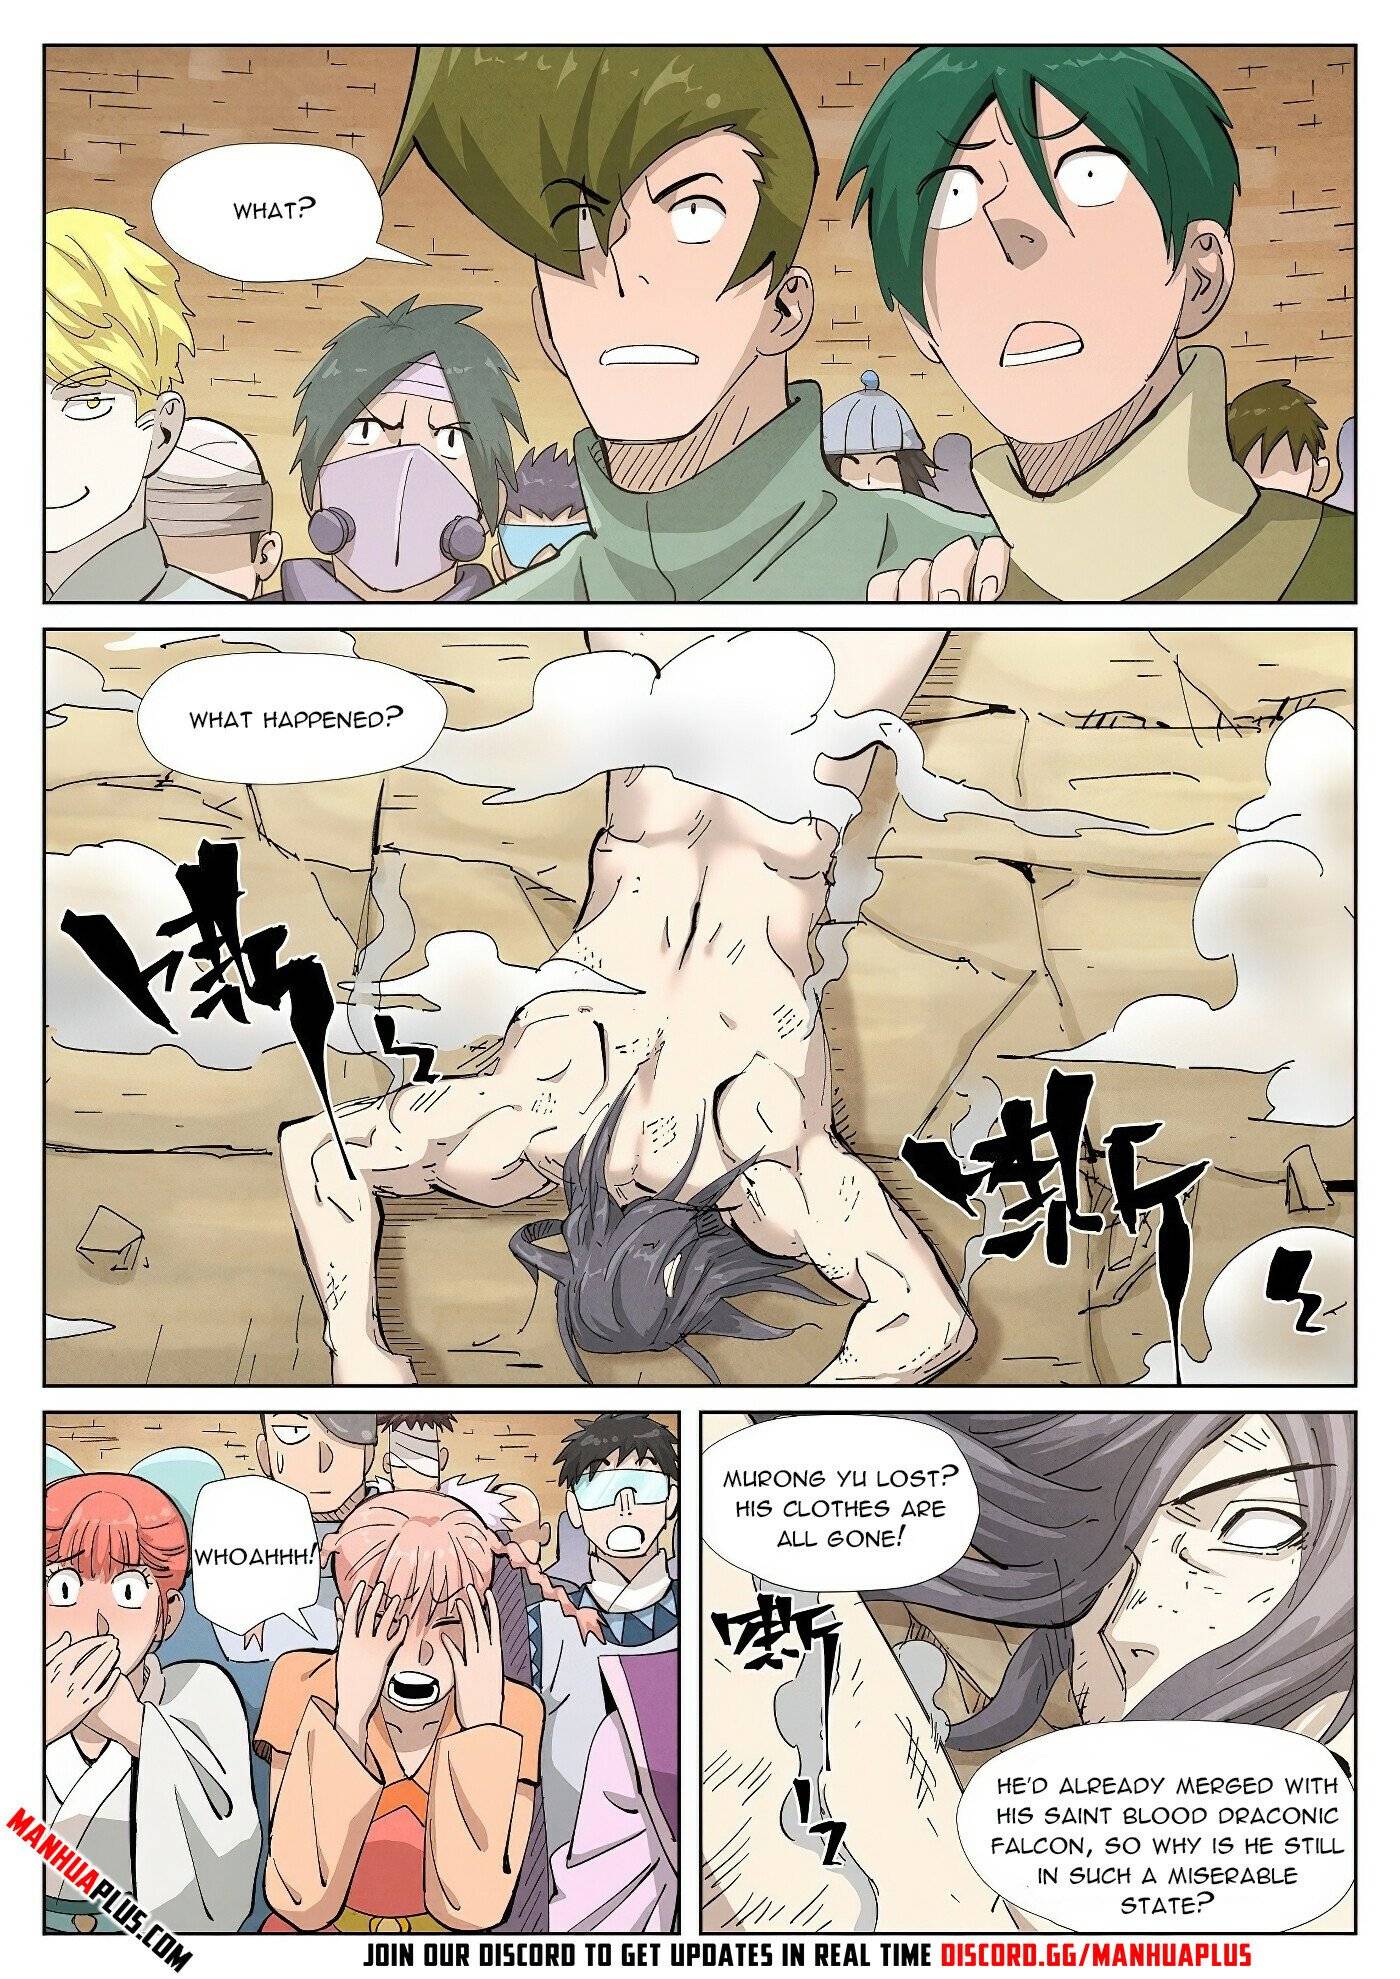 Tales of Demons and Gods Manhua Chapter 370.5 - Page 6